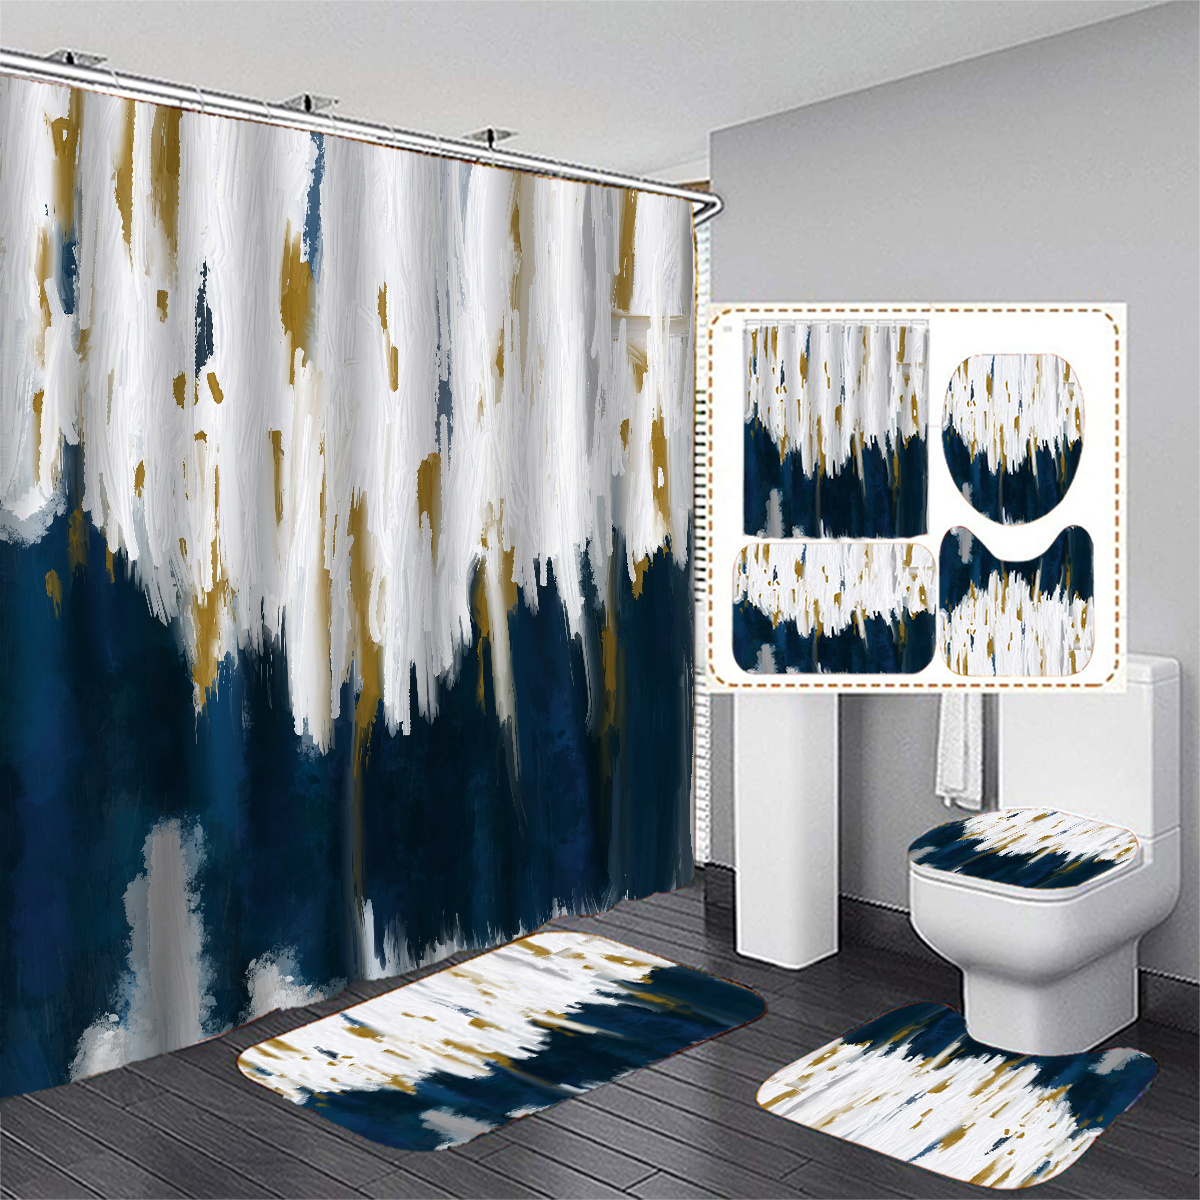 Blue Shower Curtain, Graffiti Ombre Fabric Shower Curtains For Modern  Abstract Bathroom Decor, Brush Strokes Oil Painting Design, Watercolor,  Navy Blu